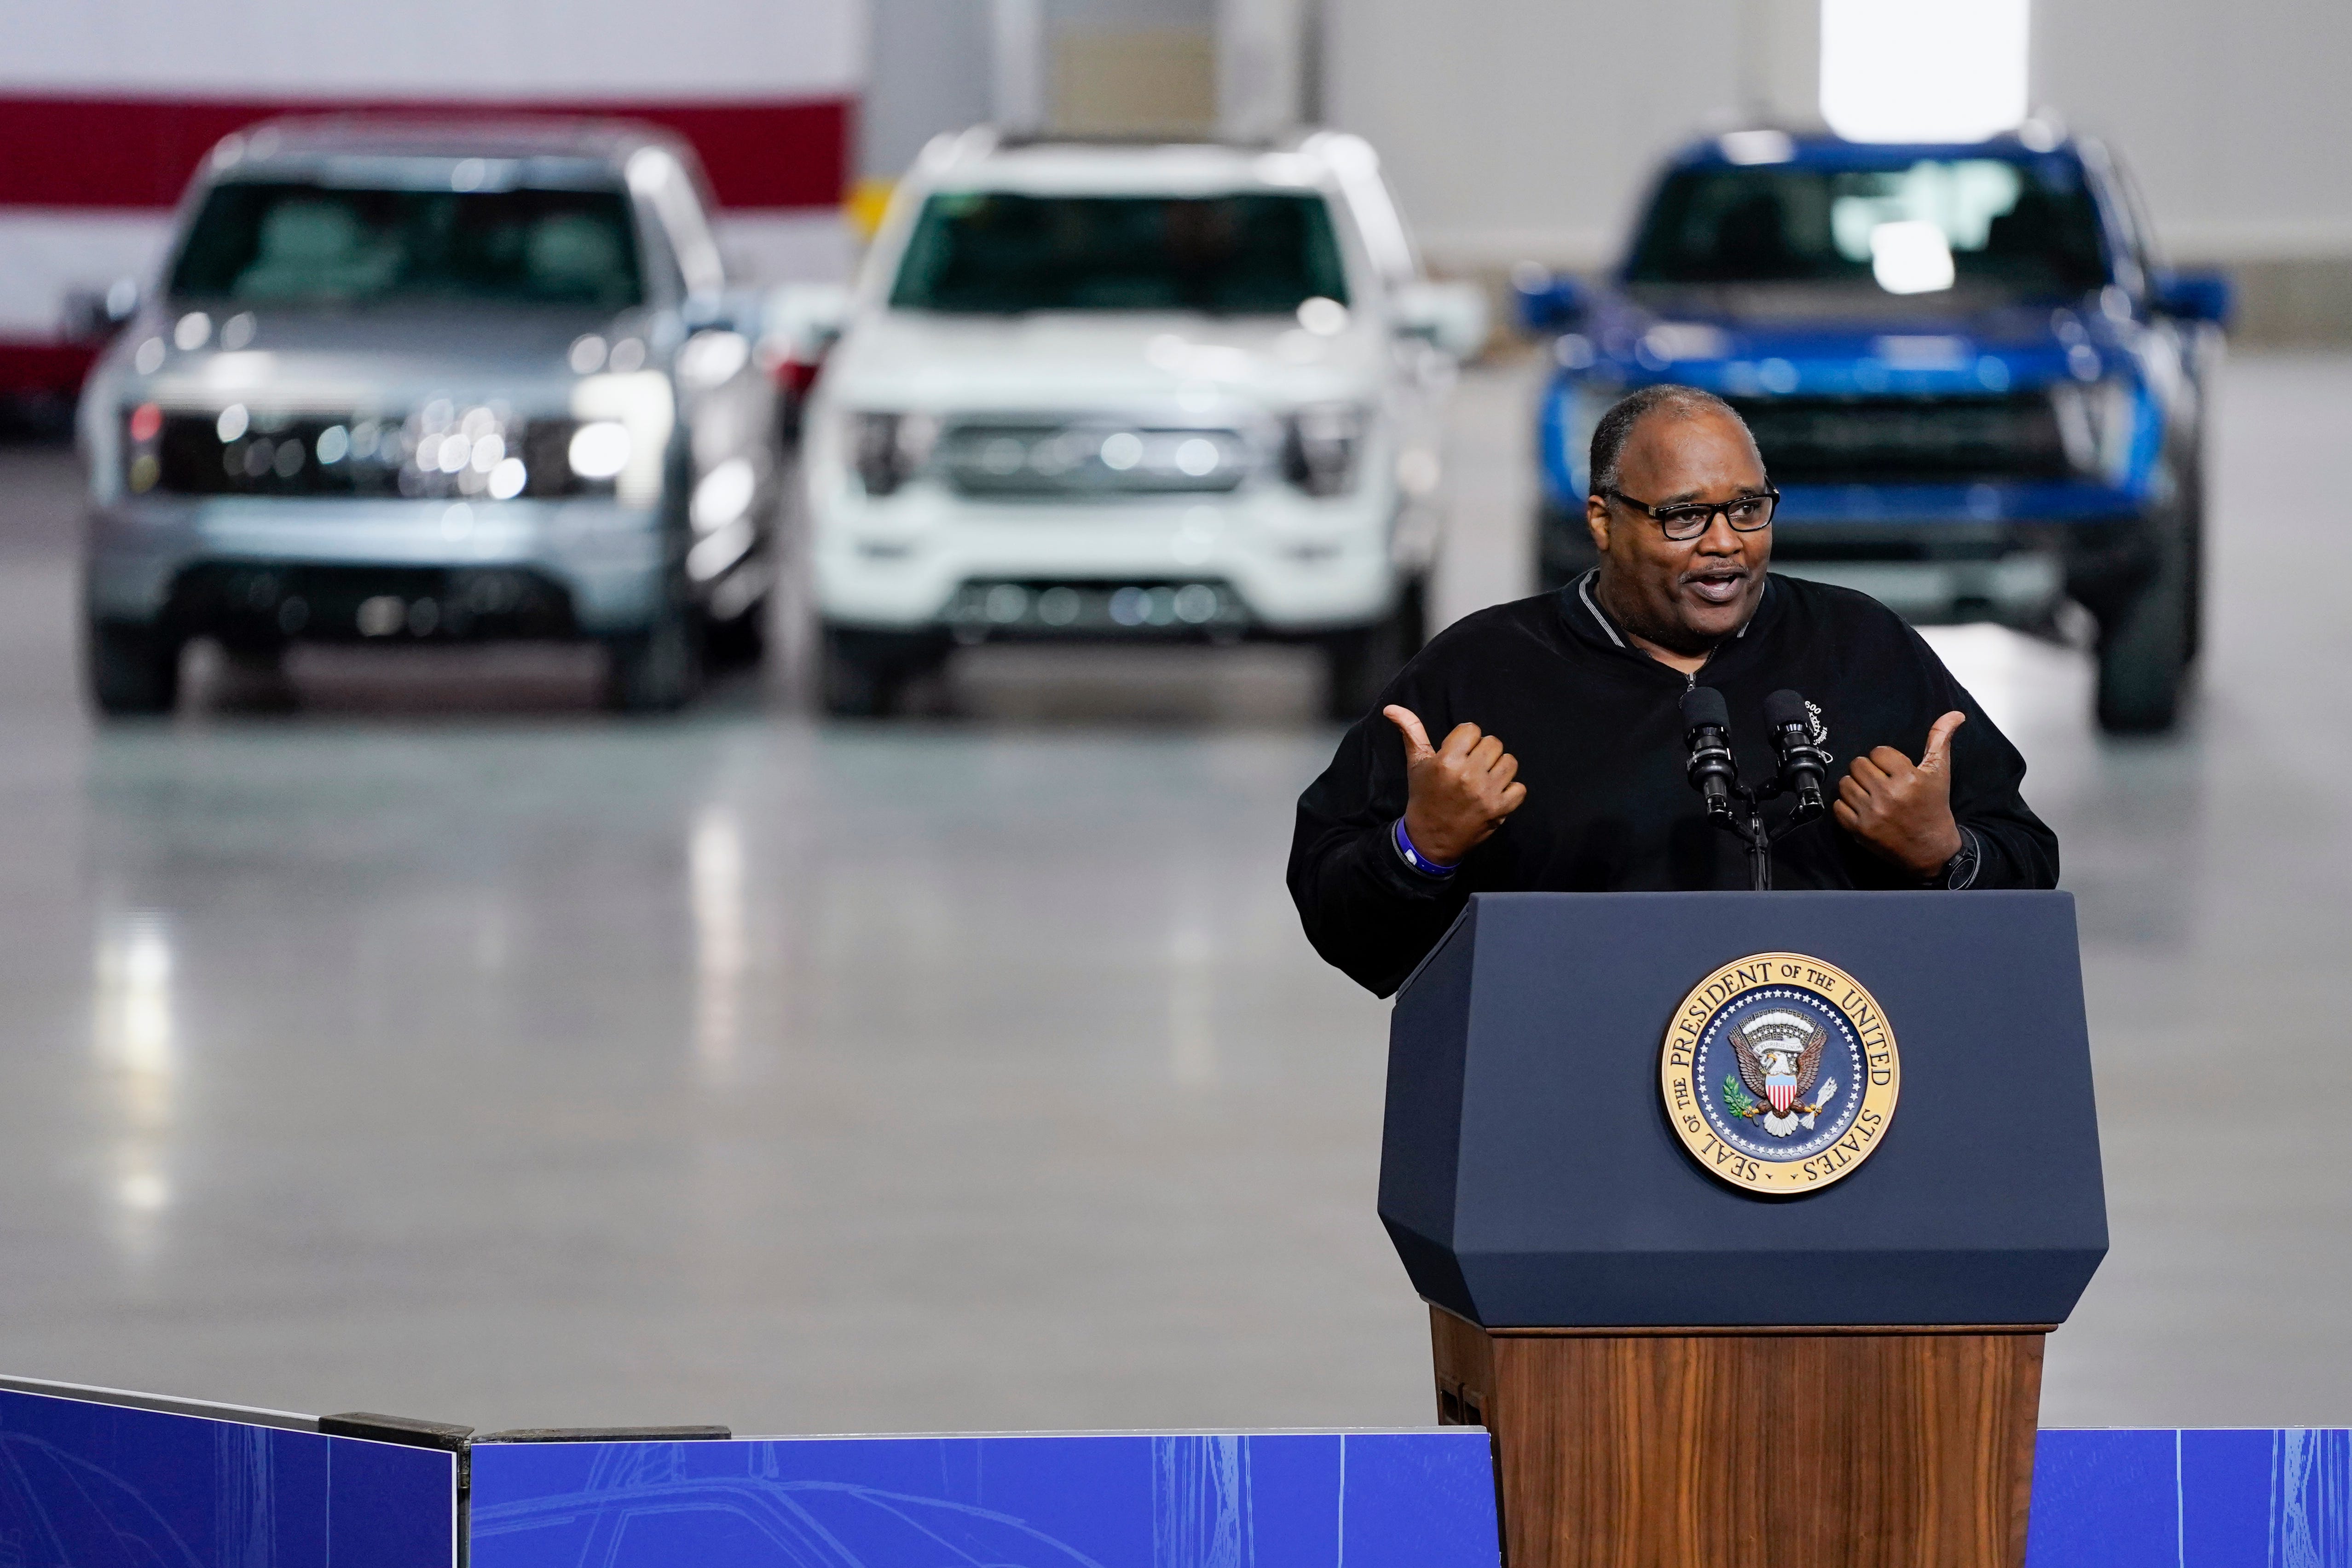 Rory Gamble, President of United Auto Workers, speaks at the Ford Rouge EV Center, Tuesday, May 18, 2021, in Dearborn, Mich.